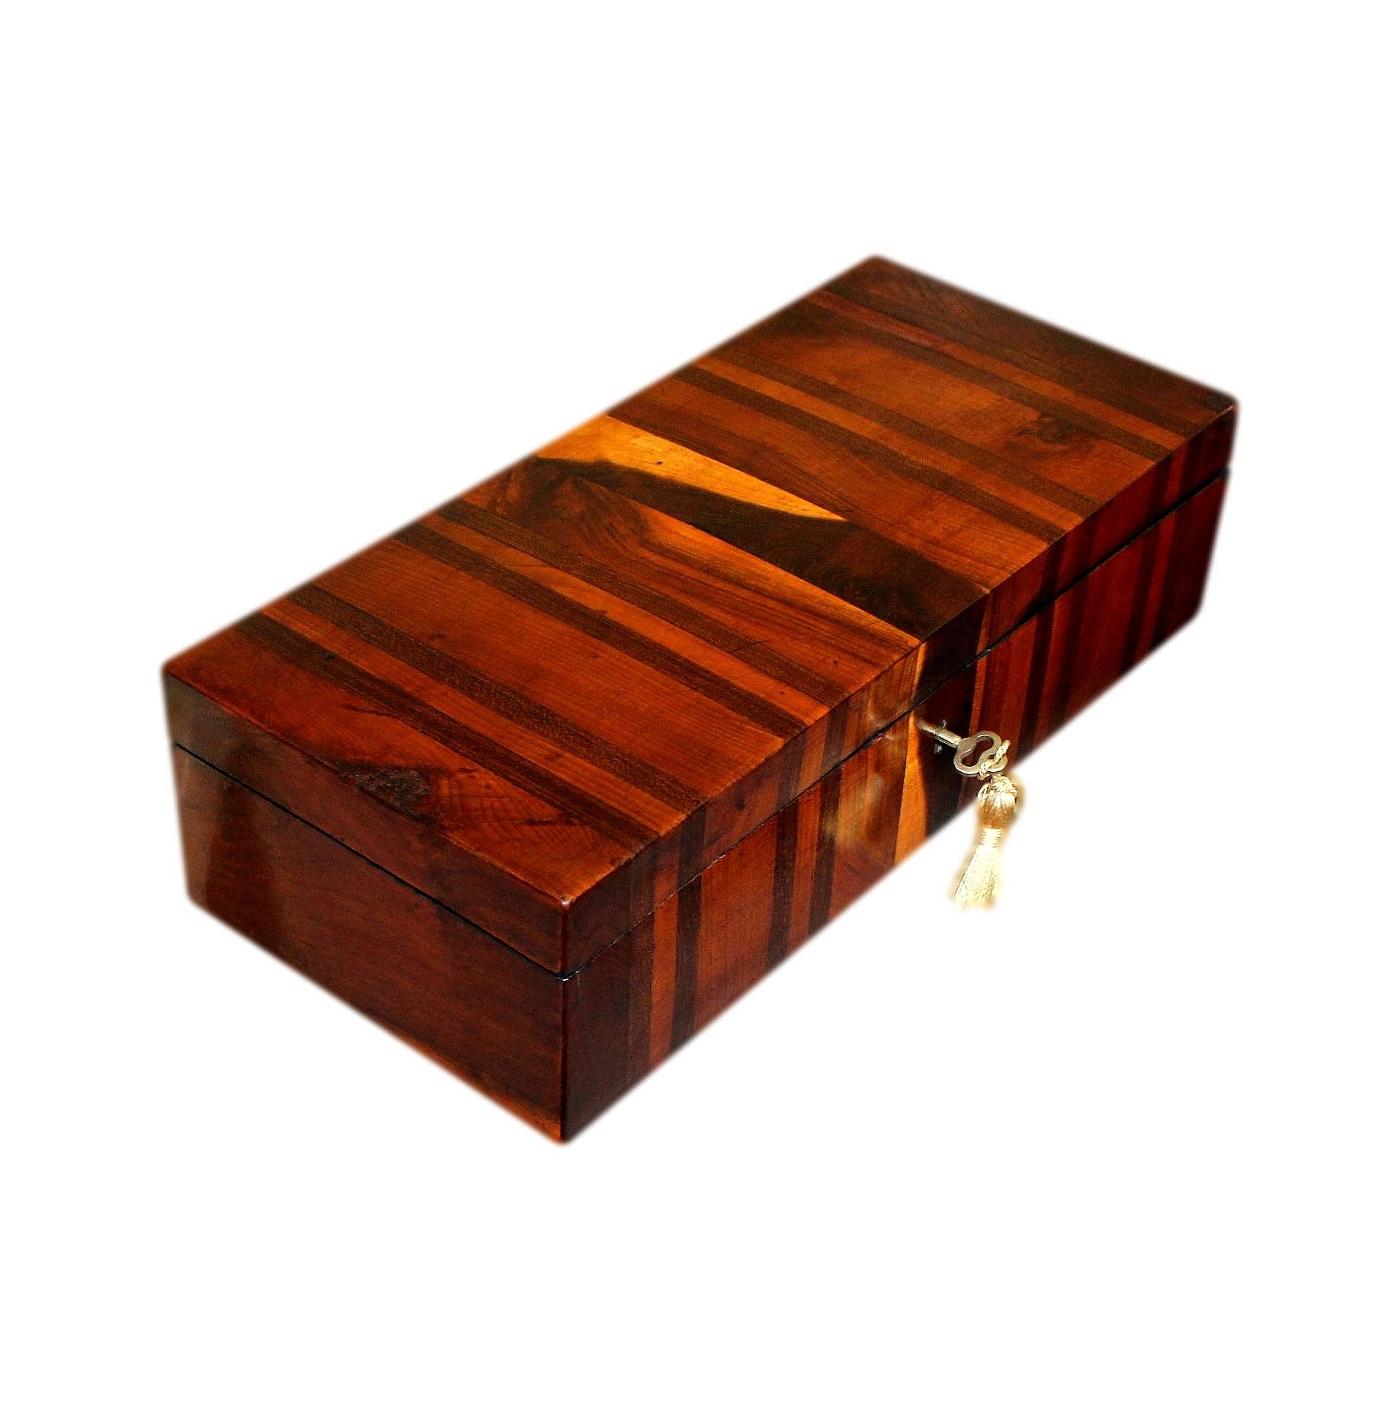 Beautiful Antique Jewellery Box With Bands Of Exotic Fruitwoods